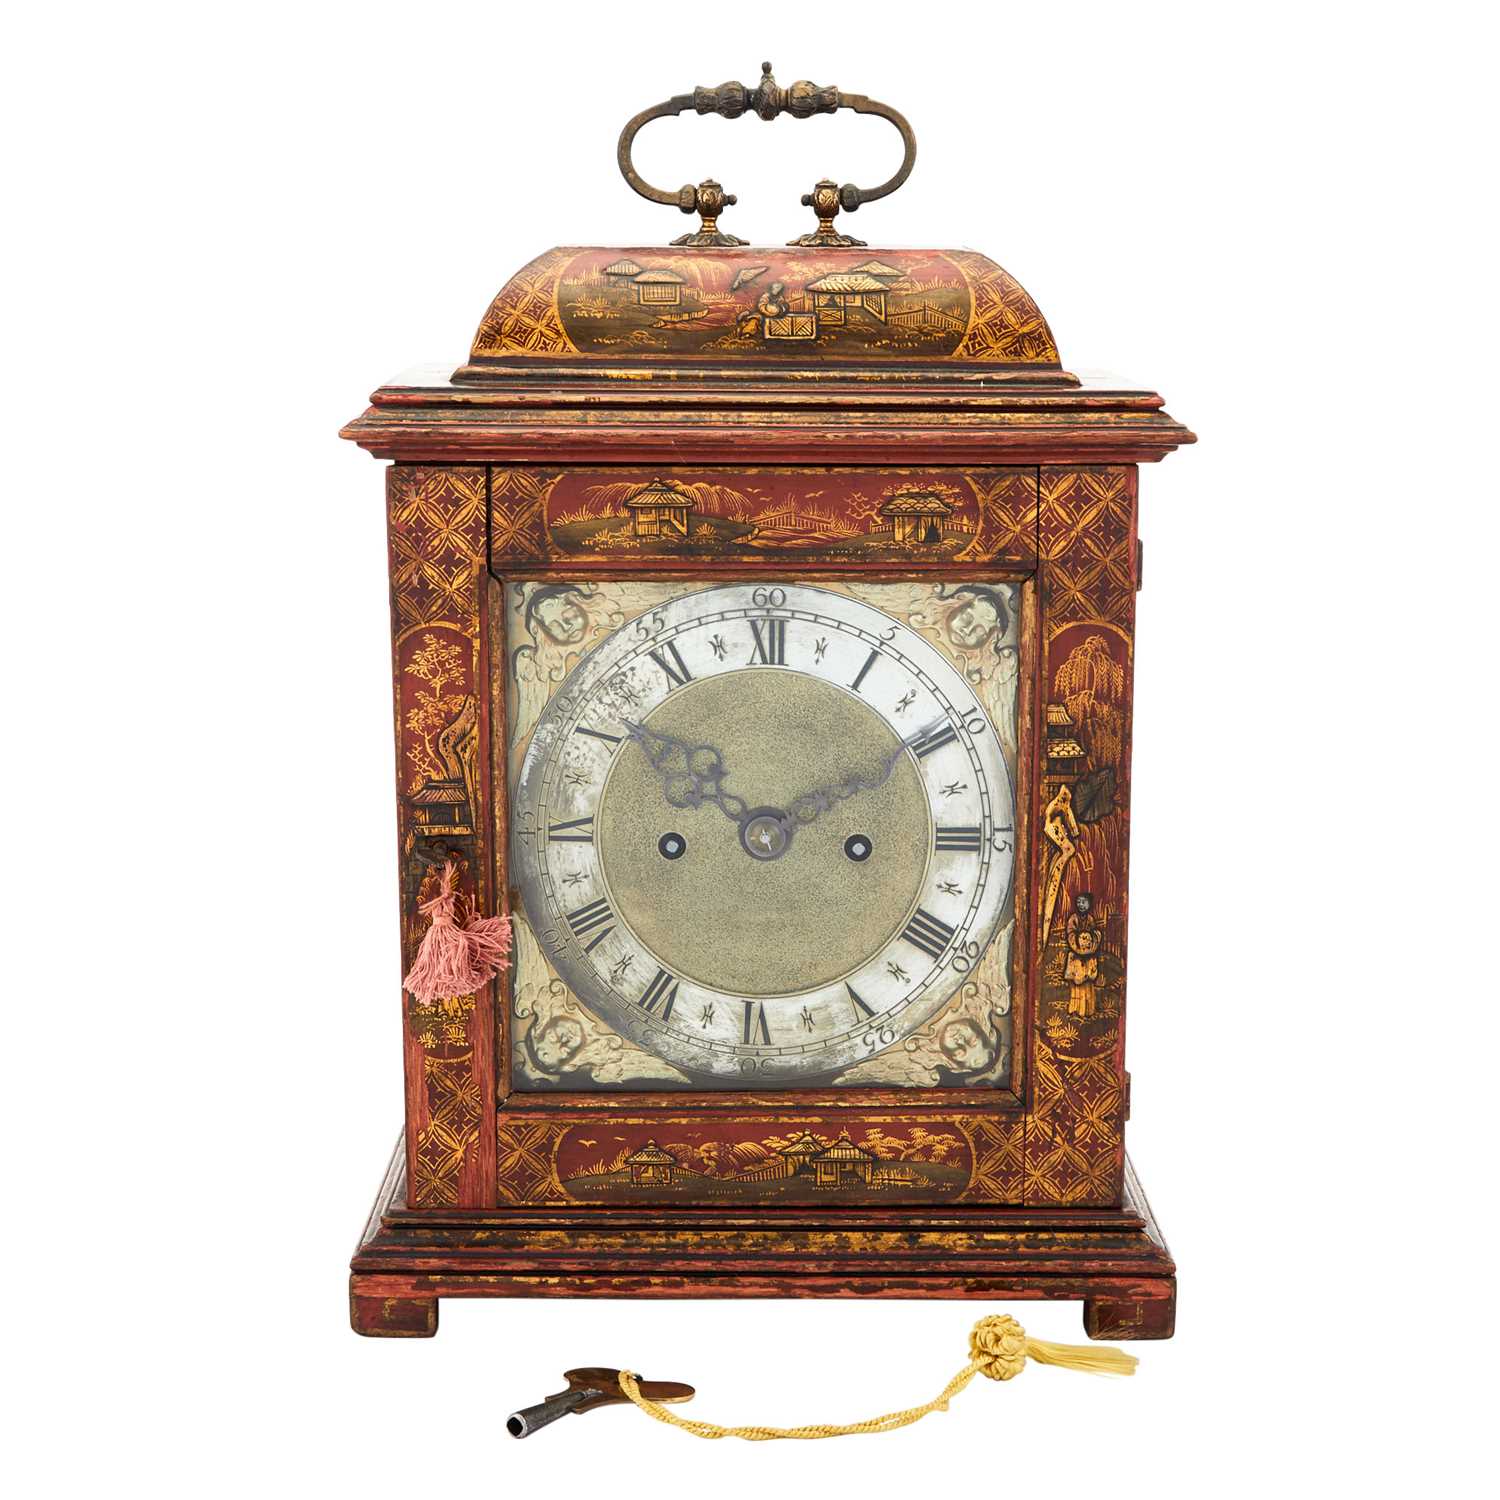 Lot 321 - English Parcel-Gilt Red Japanned Table Clock